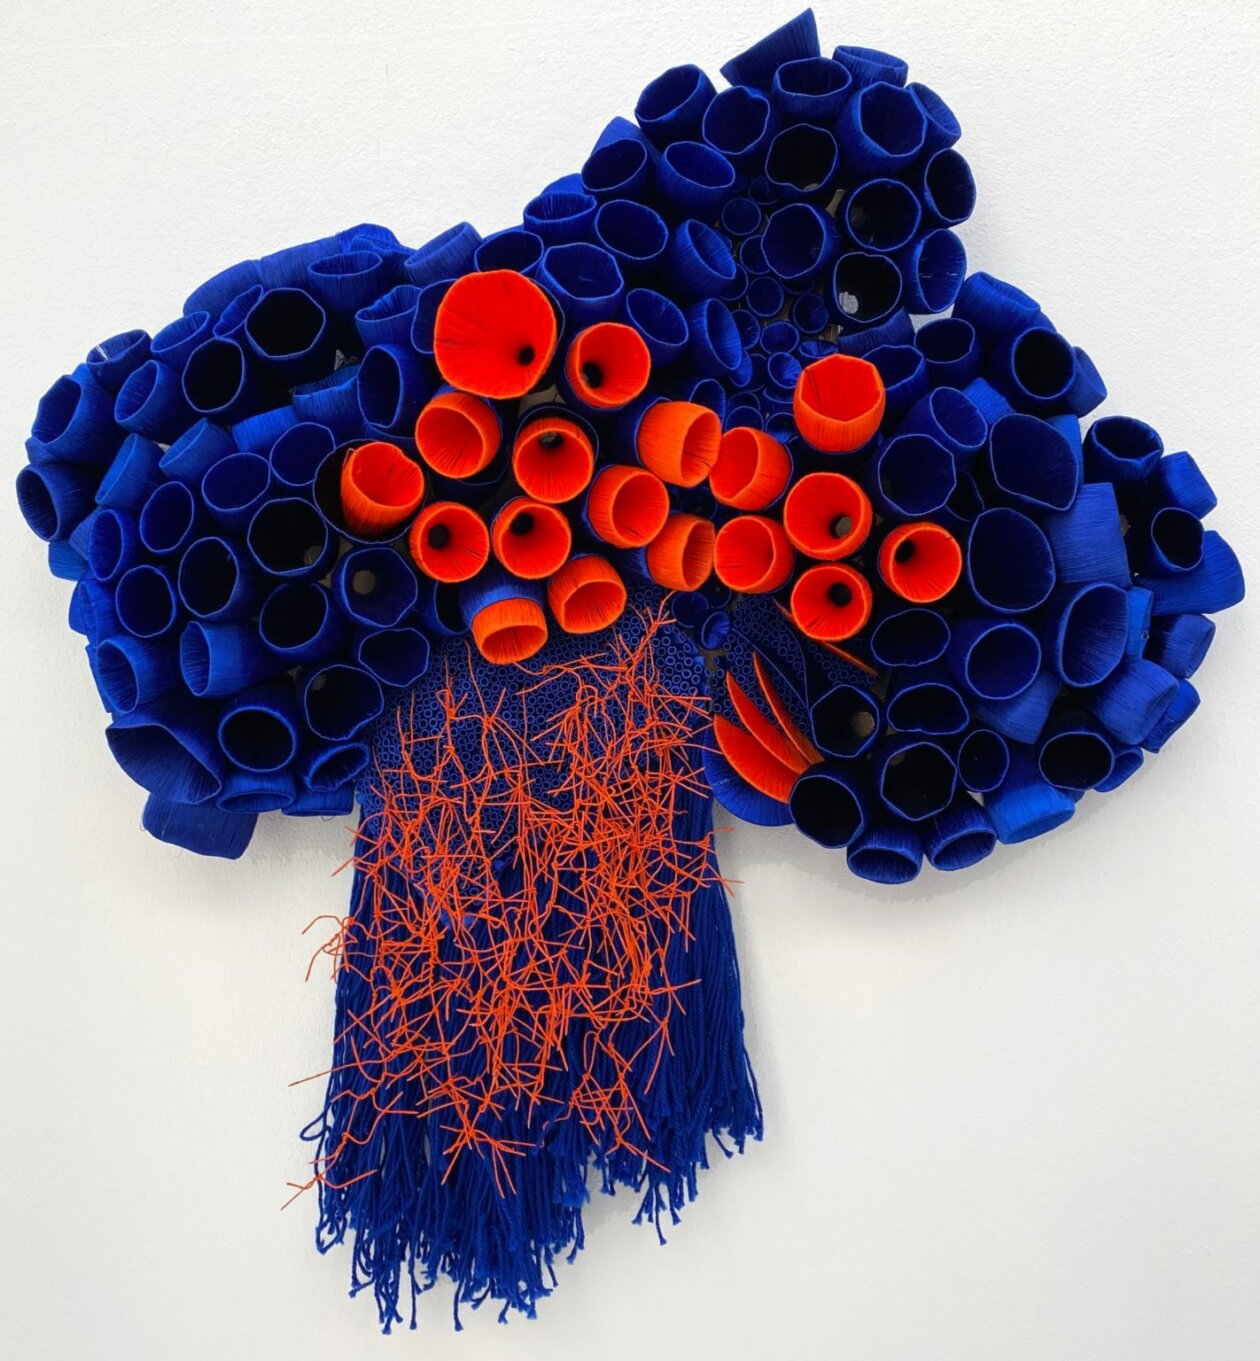 Coral Reefs, Cells, And Human Organs Made Out Of Plastic Bottle Caps And Embroideries By Ghizlane Sahli (10)